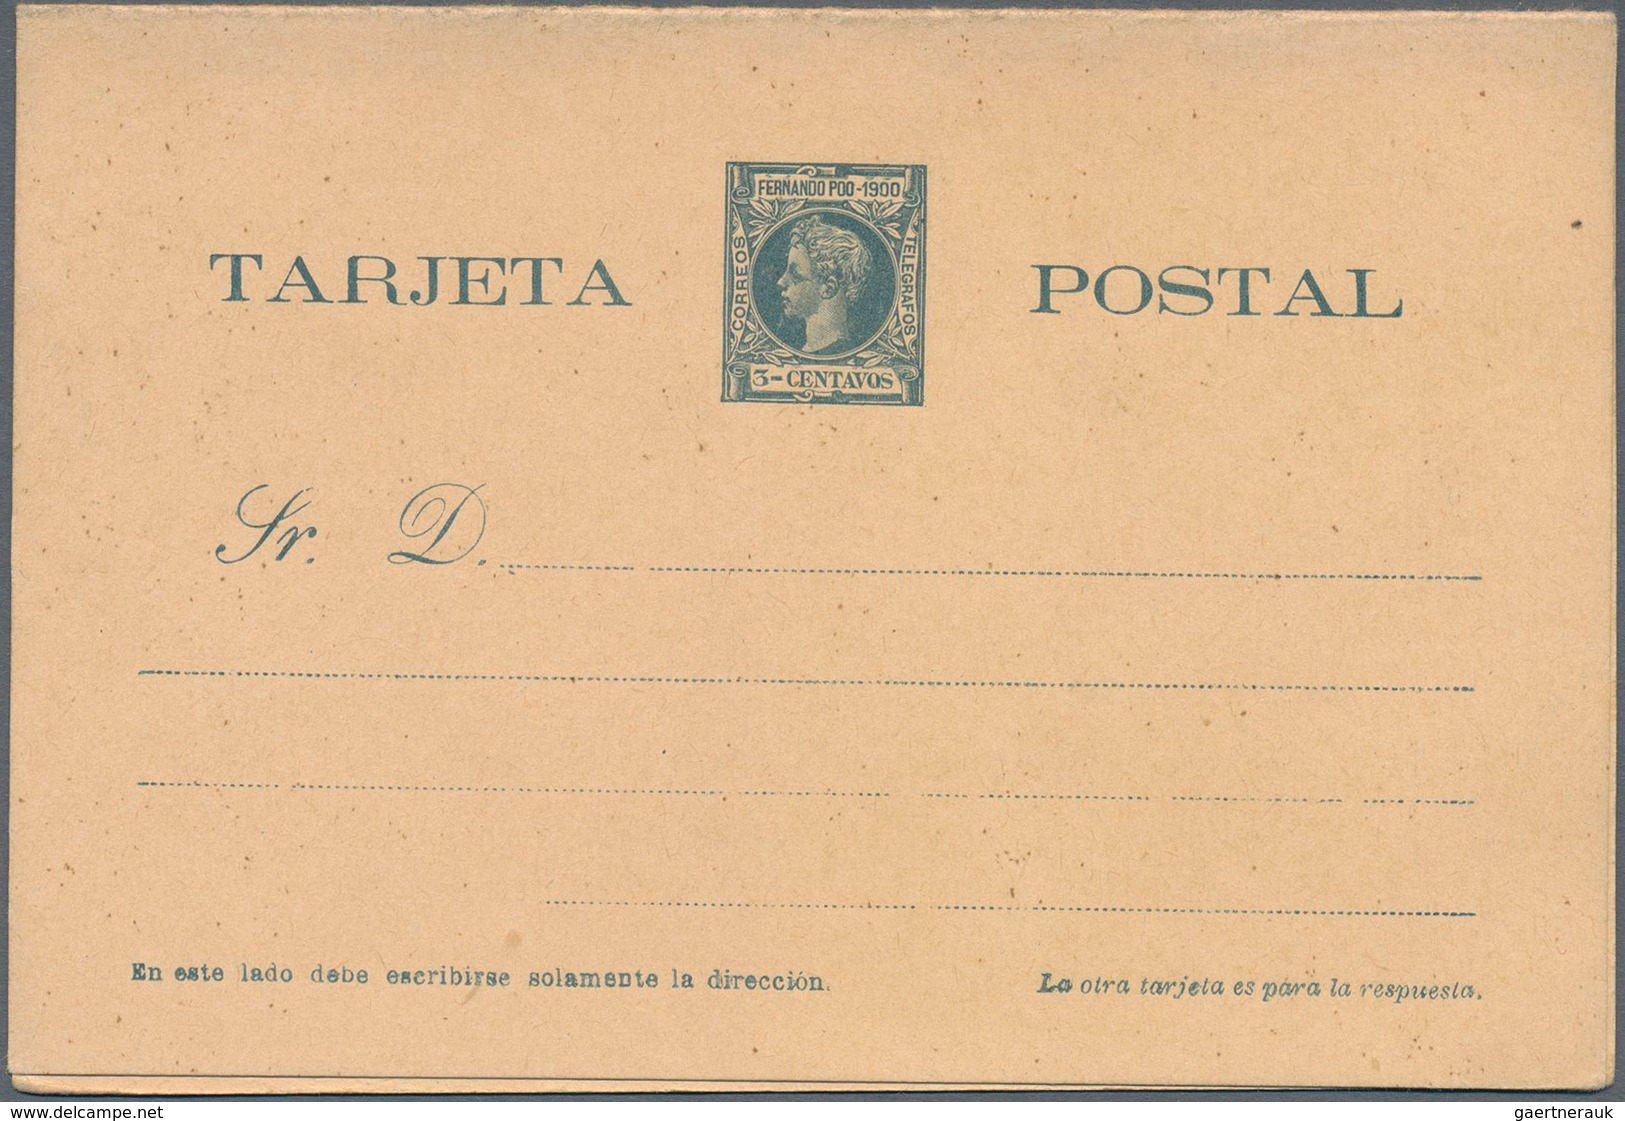 Spanien - Ganzsachen: 1900. Lot of 4 reply cards Alfonso XIII Infante "Fernando Poo-1900": one card